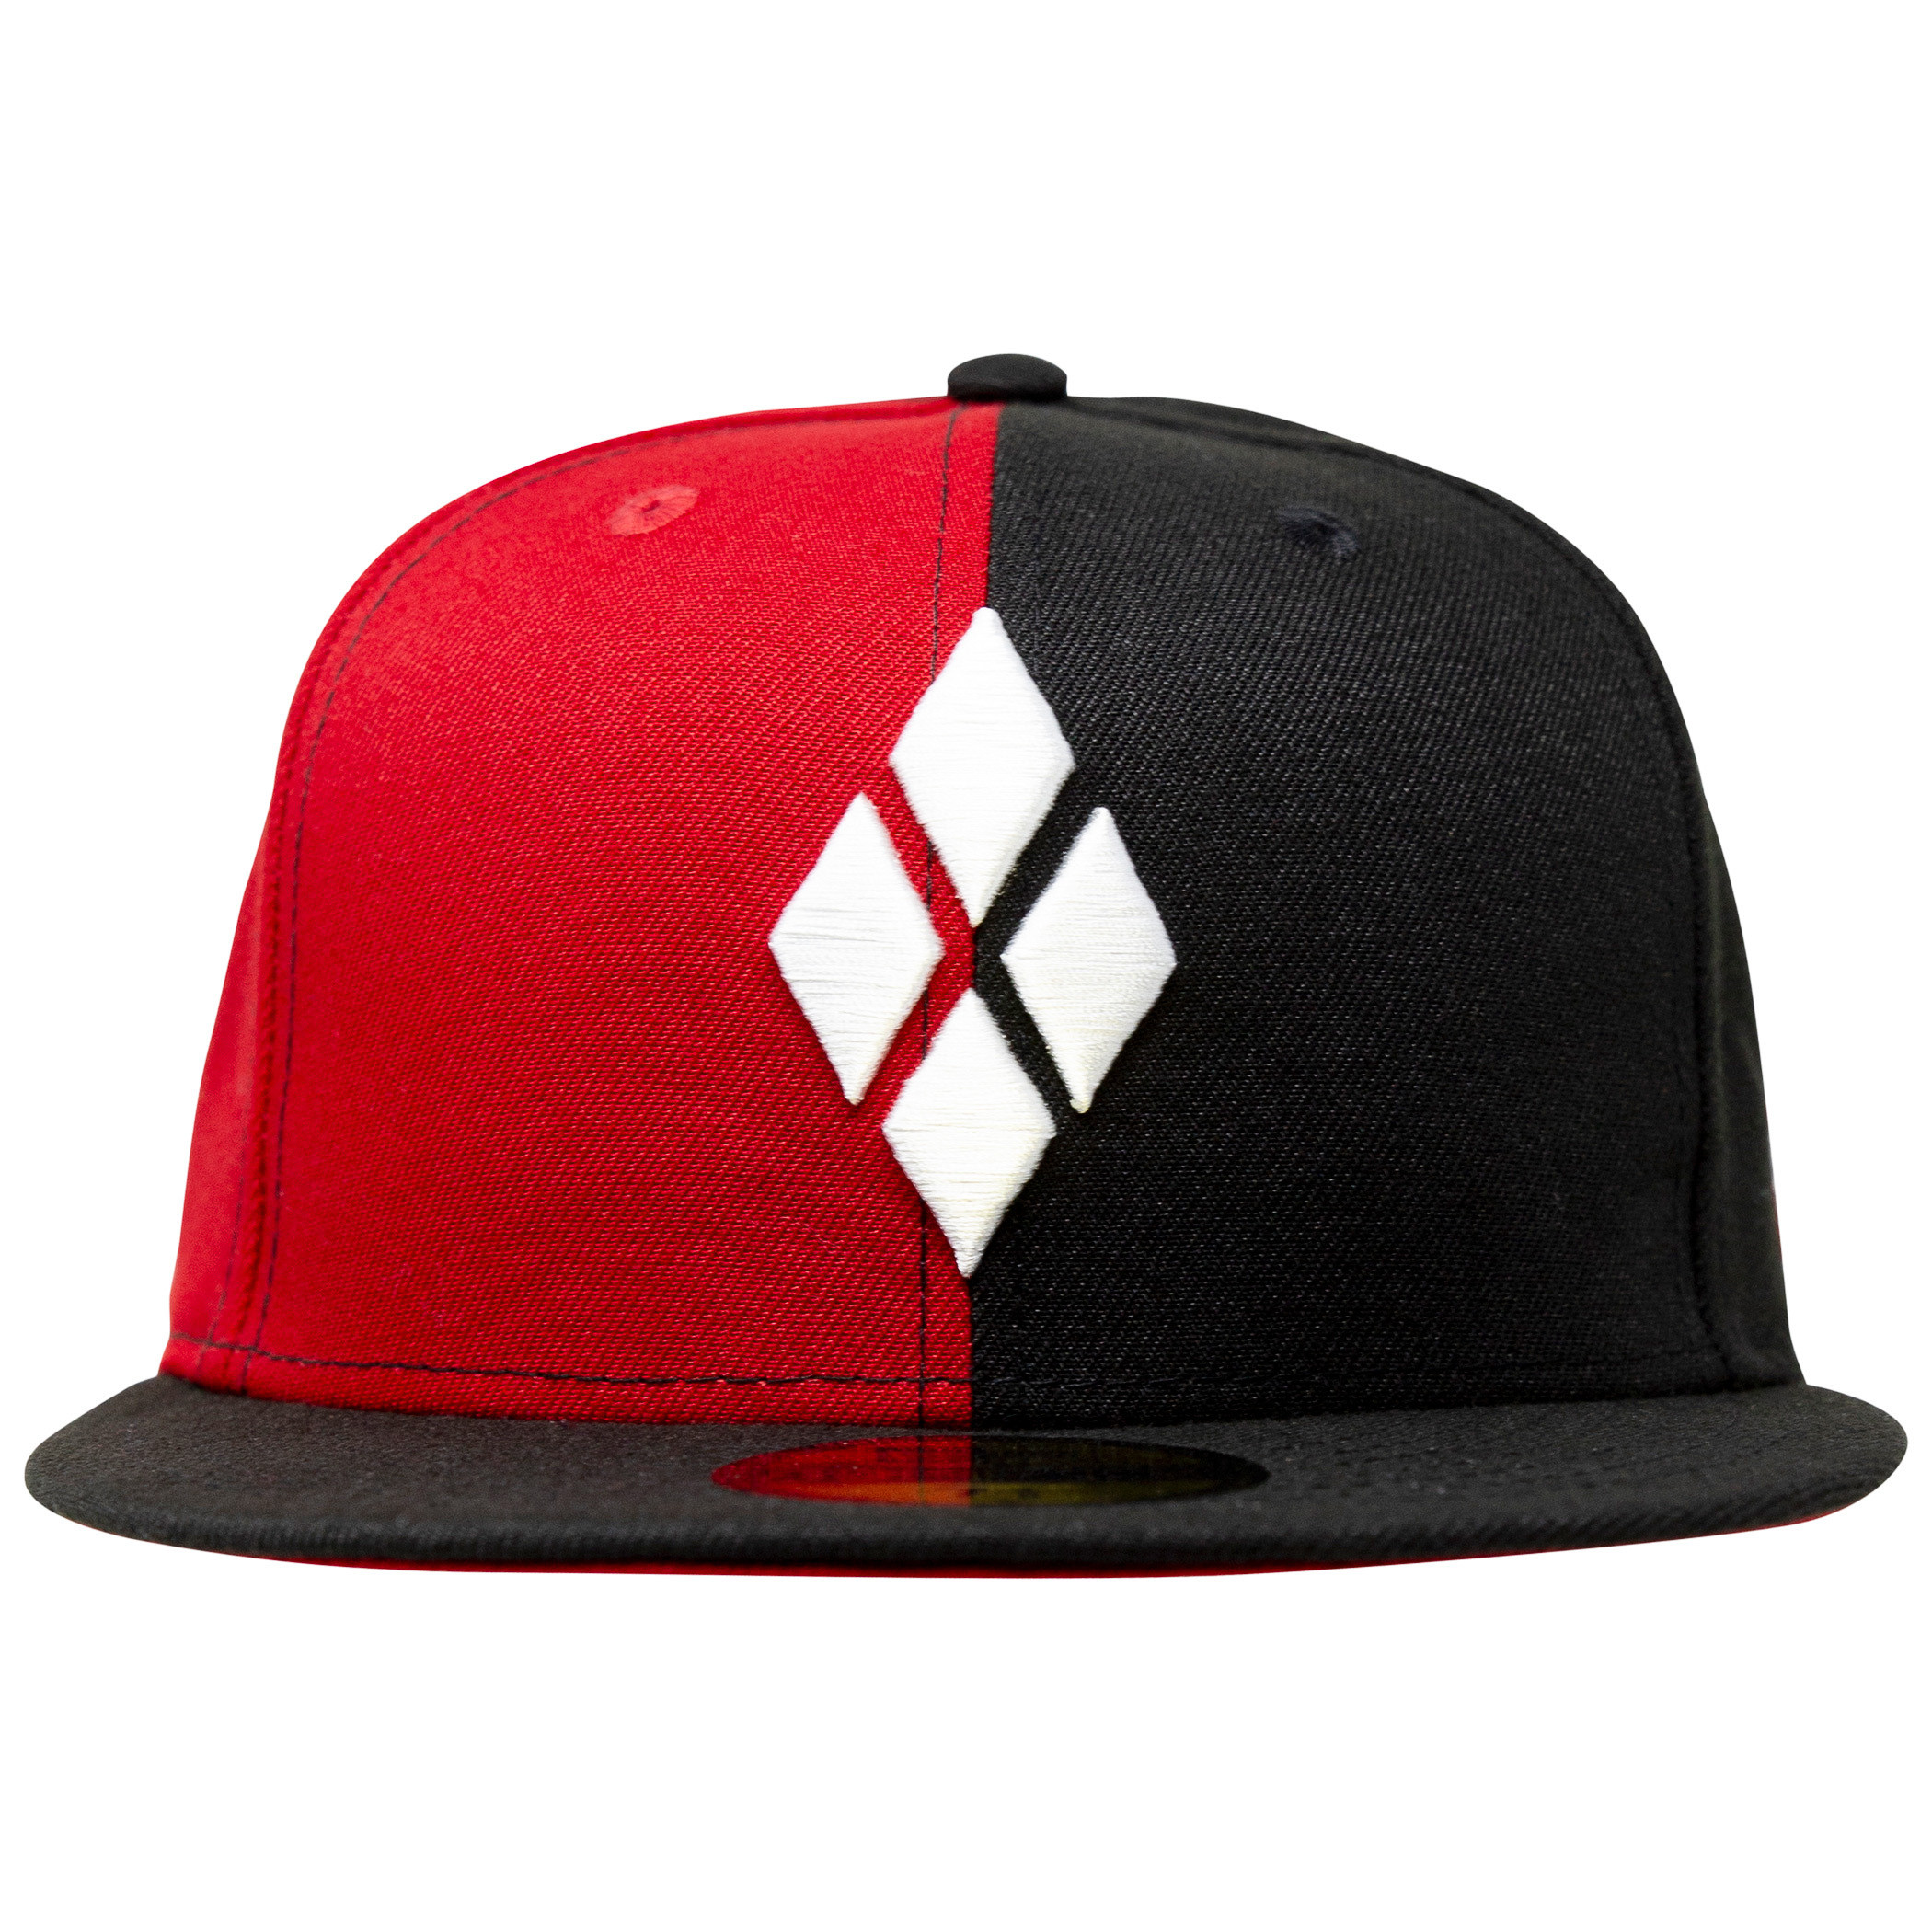 Harley Quinn Diamonds New Era 59Fifty Fitted Hat